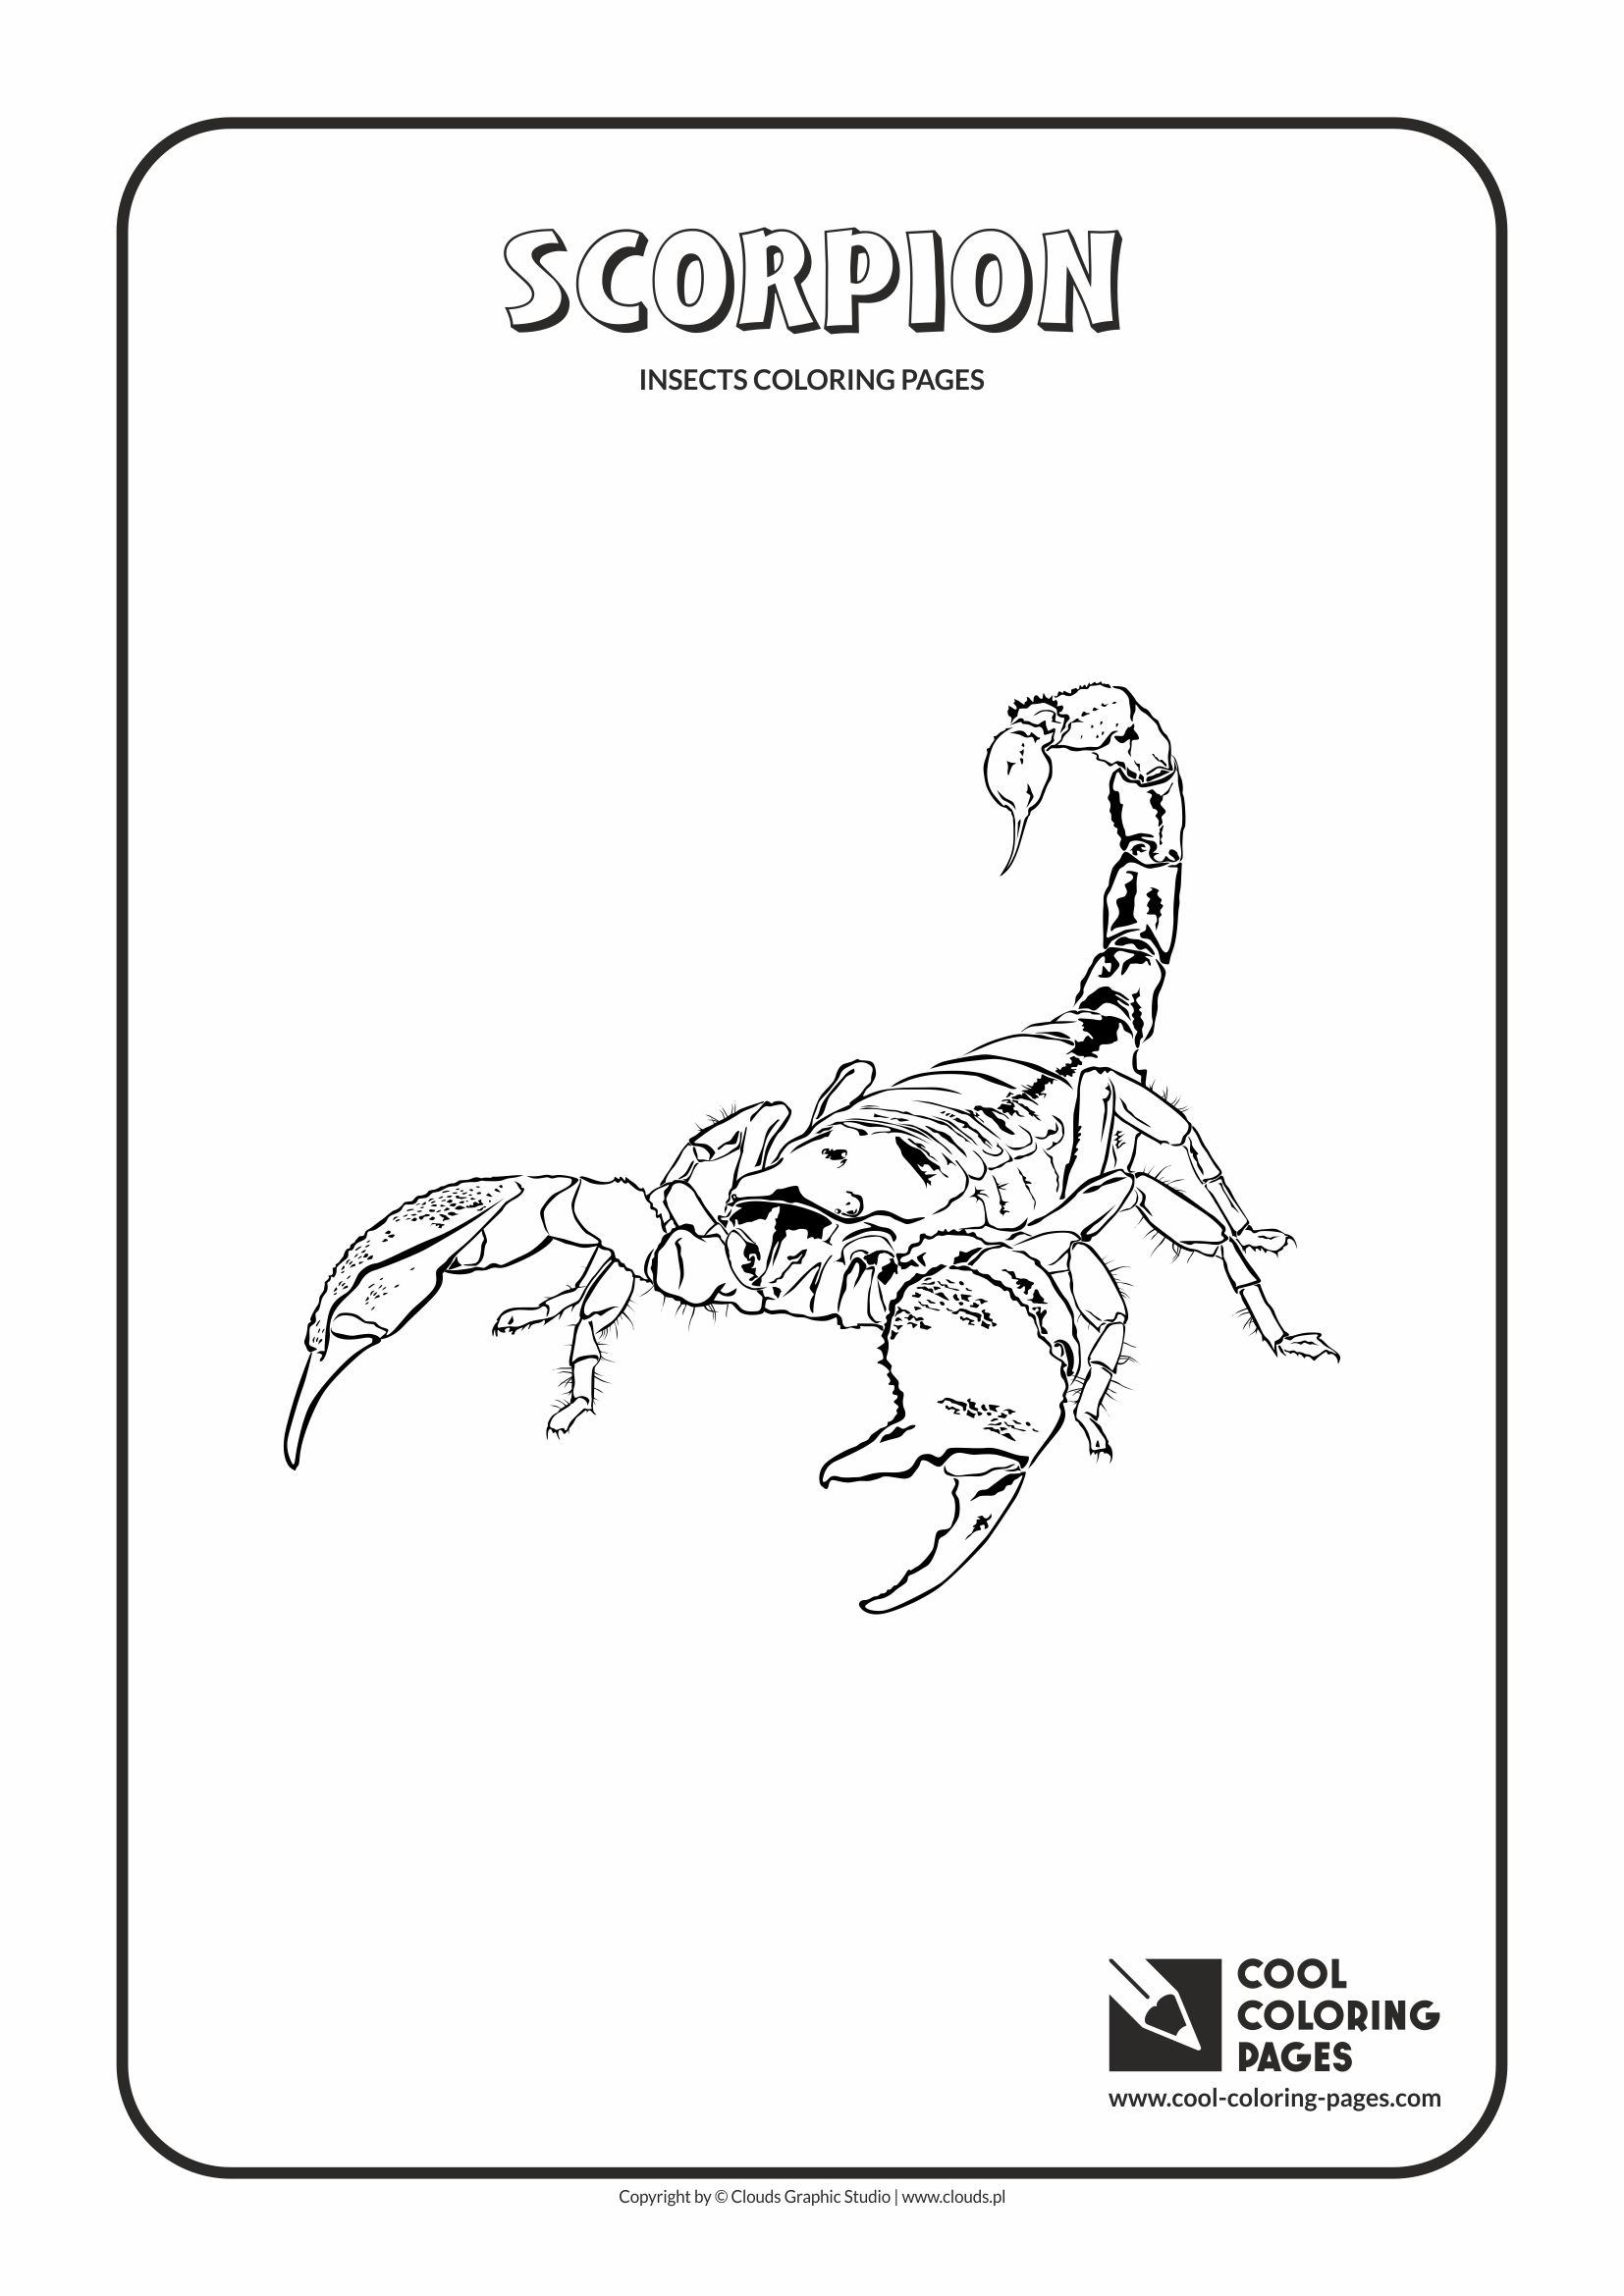 Cool Coloring Pages - Animals / Scorpion / Coloring page with scorpion